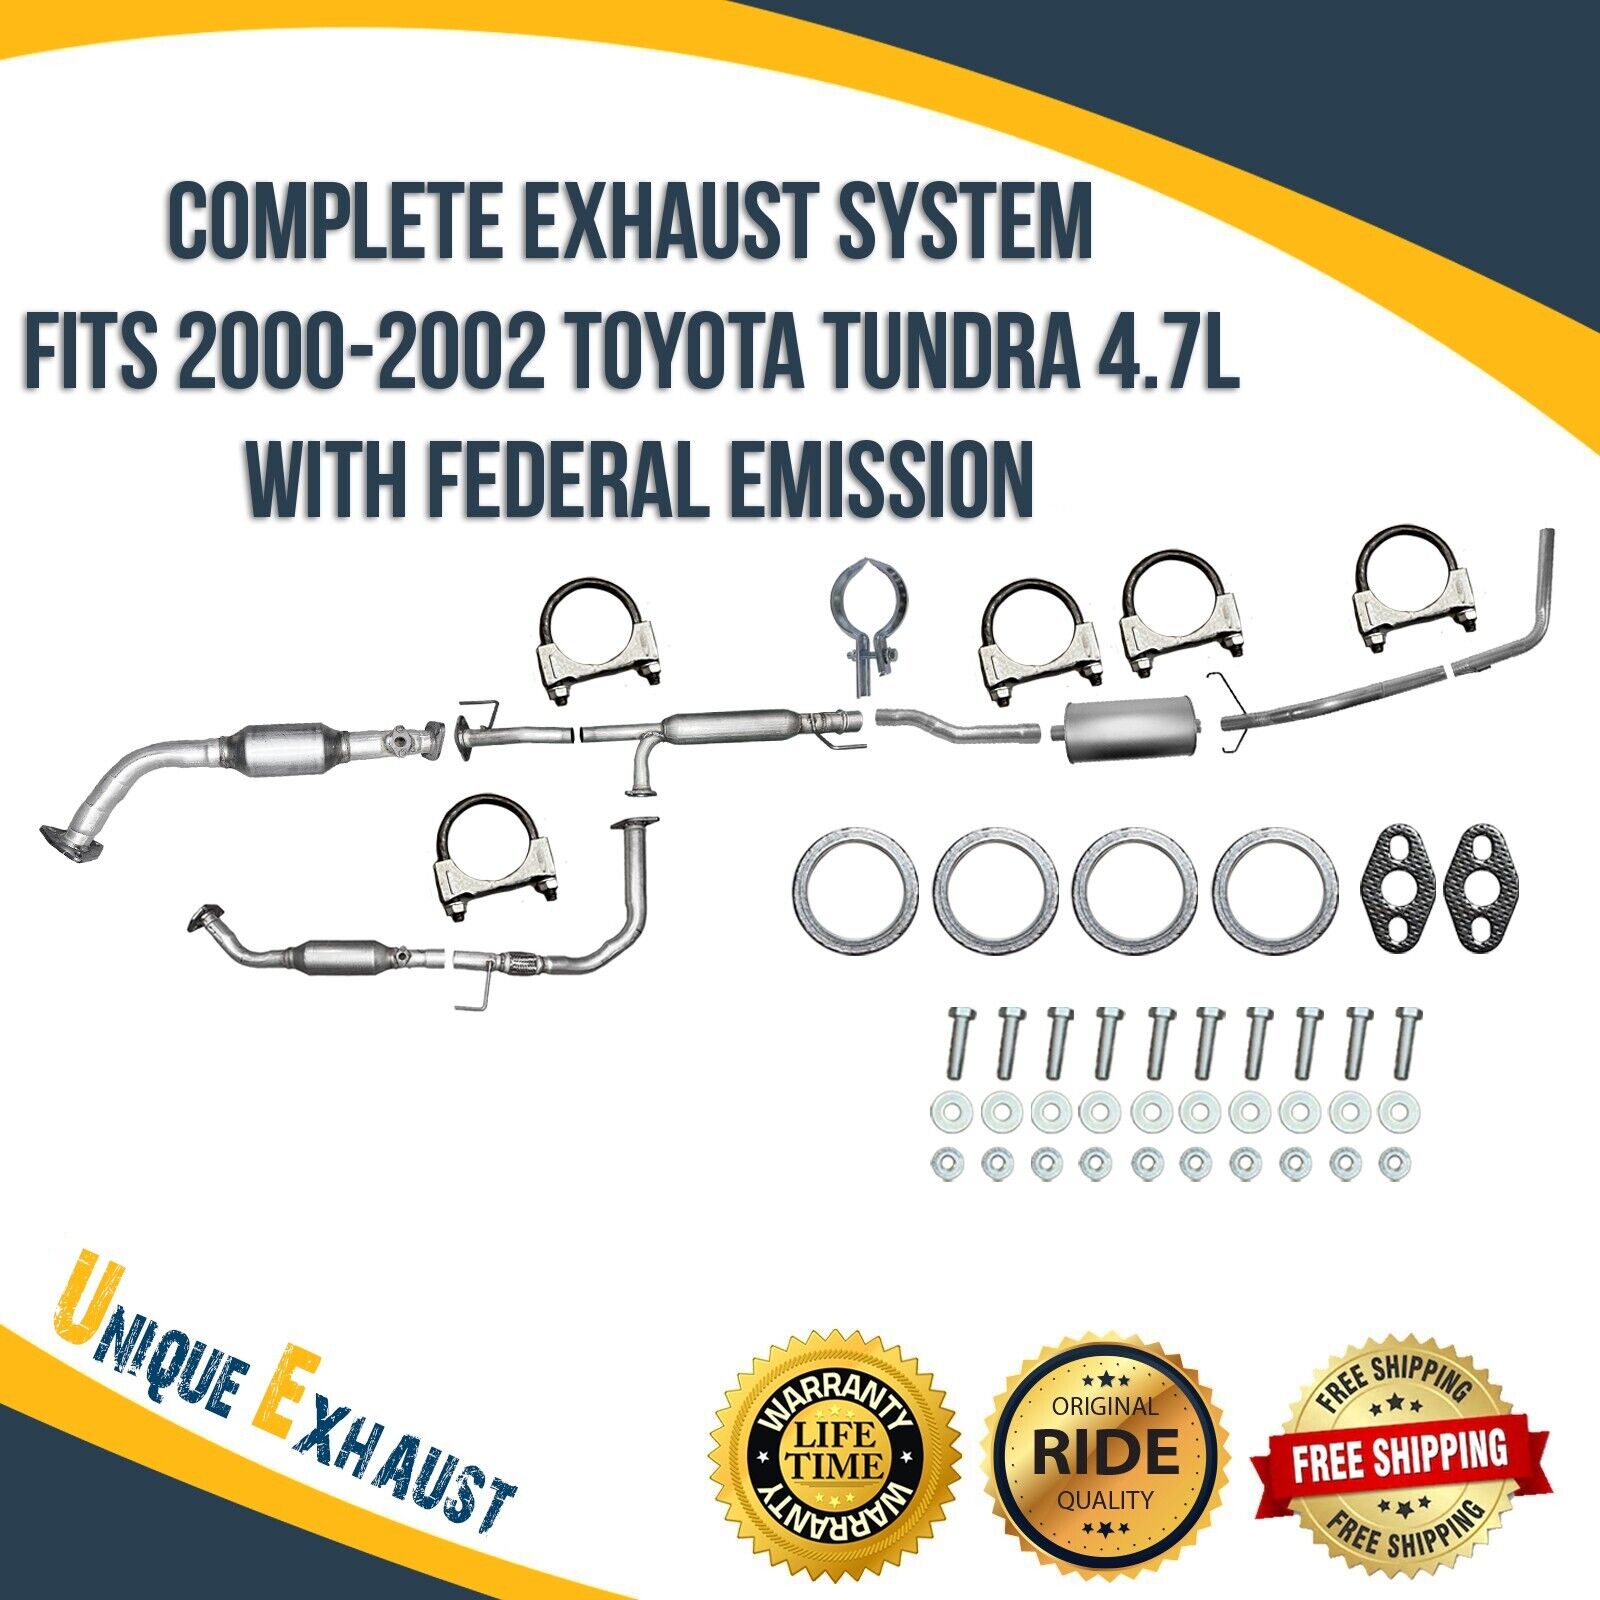 Complete Exhaust System Fits 2000-2002 Toyota Tundra 4.7L with Federal Emission